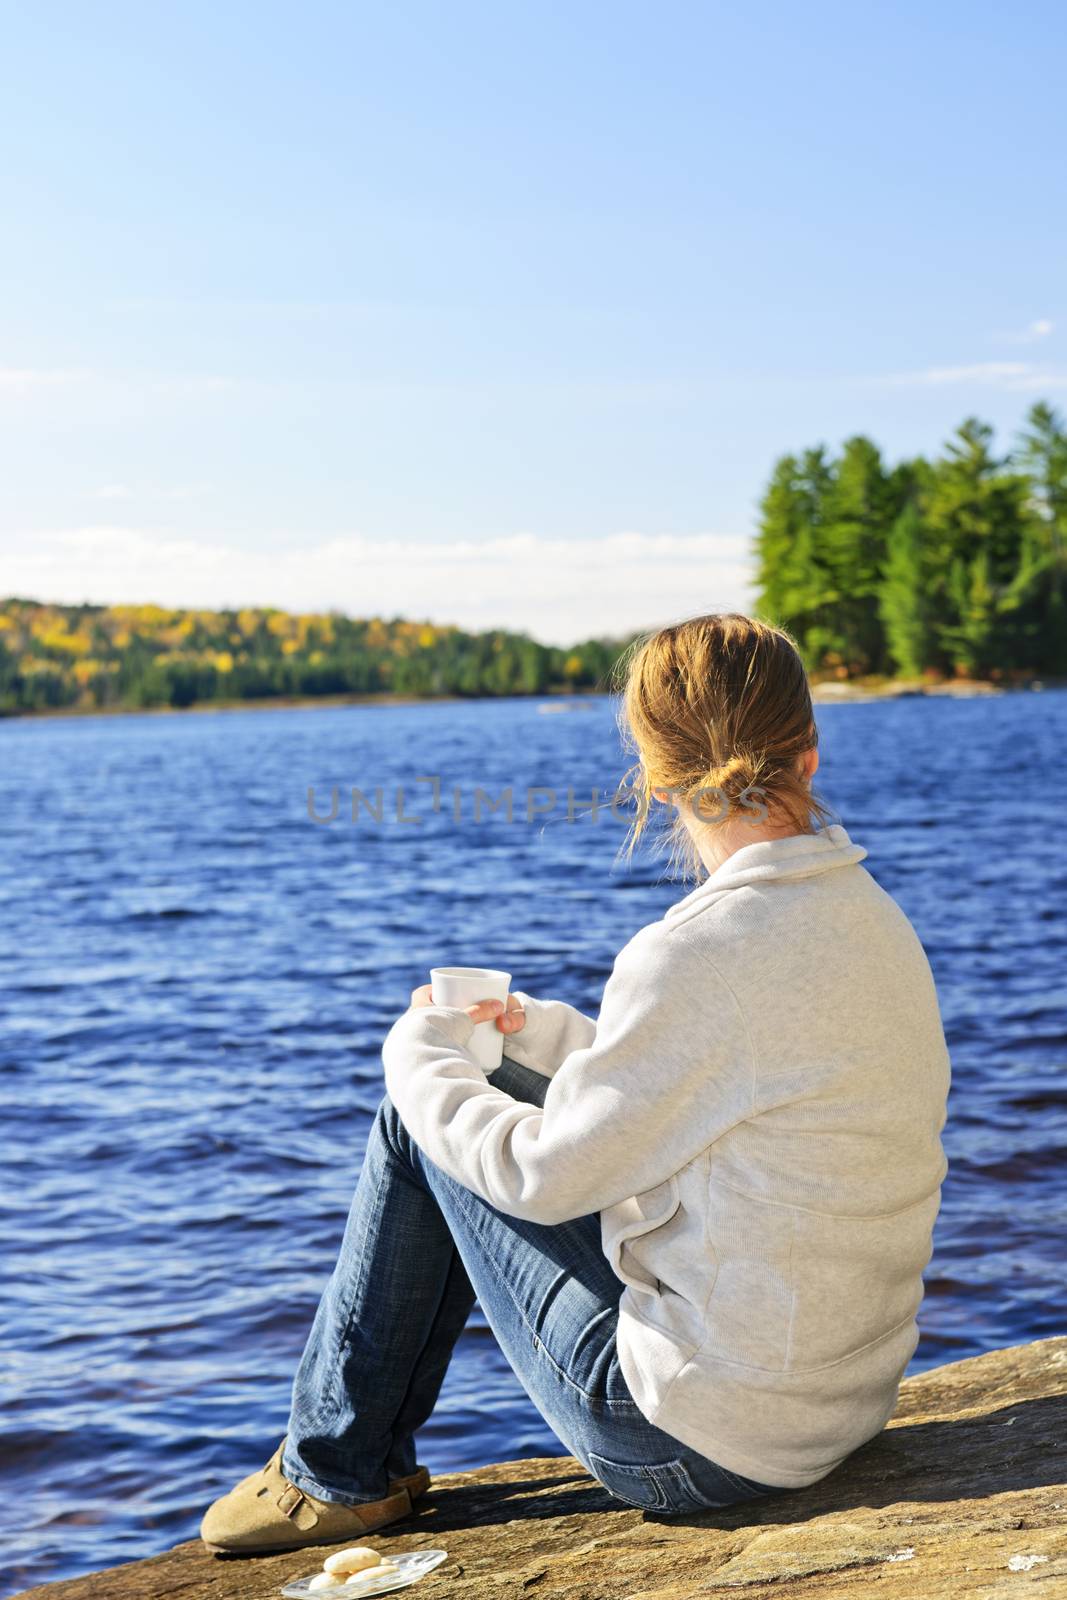 Woman sitting on rock relaxing by beautiful lake in Algonquin Park, Canada.